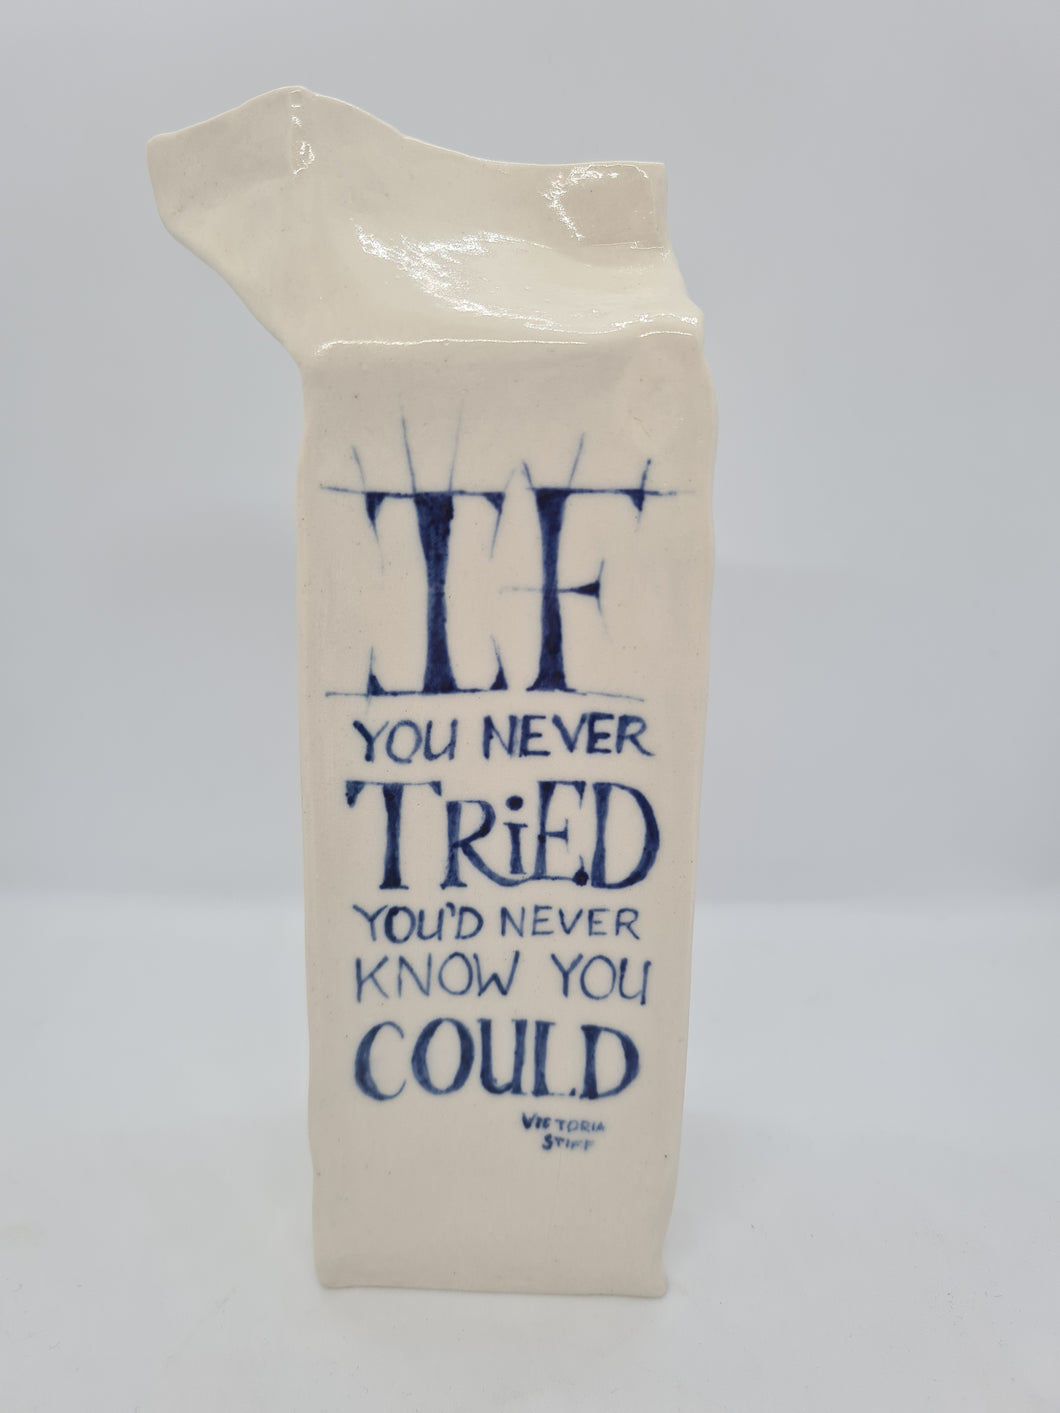 Milk Carton 006 - If you never tried you'd never know you could